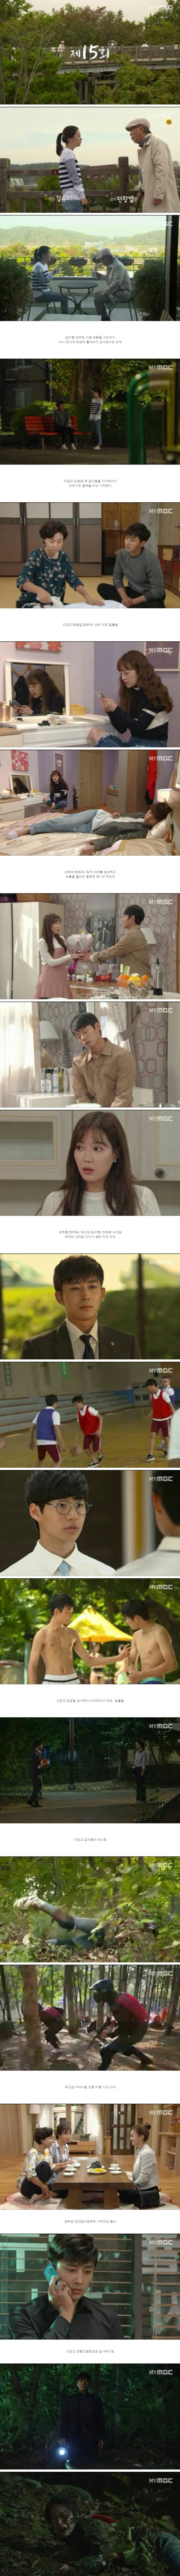 episodes 15 and 16 captures for the Korean drama 'Blow Breeze'